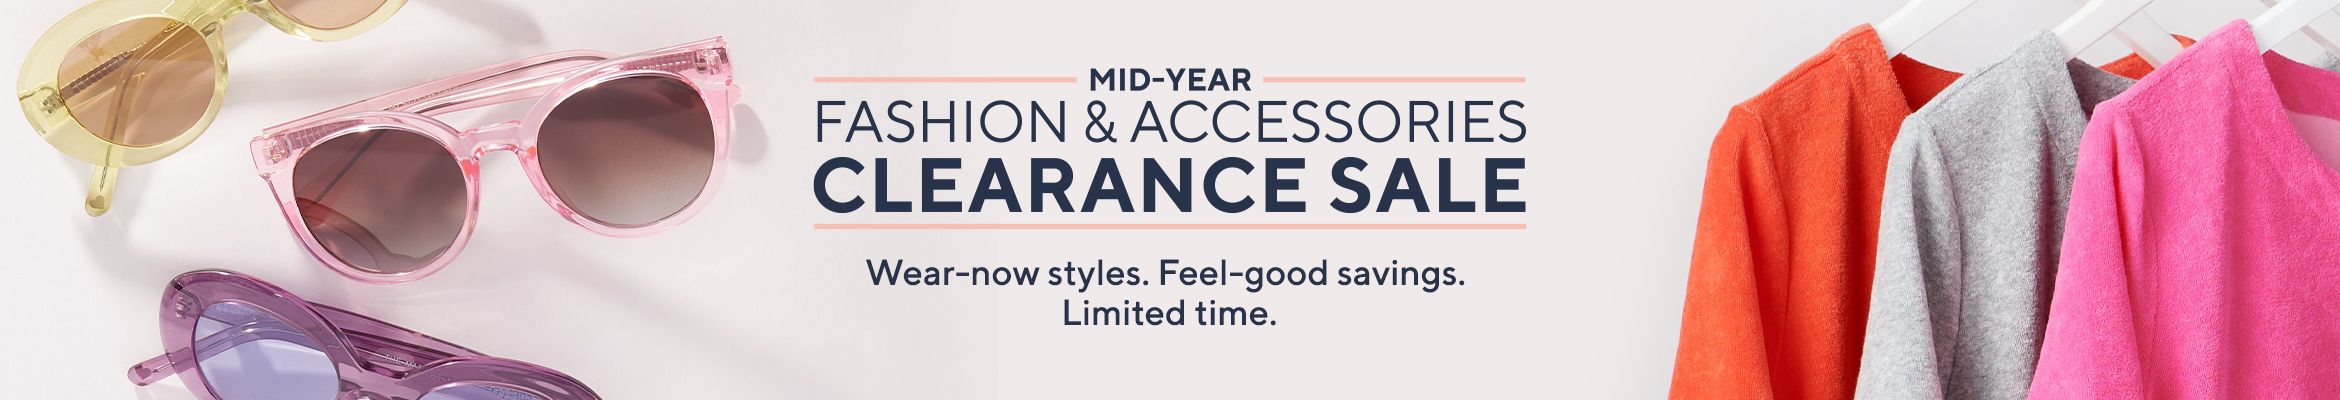 Mid-Year Fashion & Accessories Clearance Sale - Wear-now styles. Feel-good savings. Limited time.